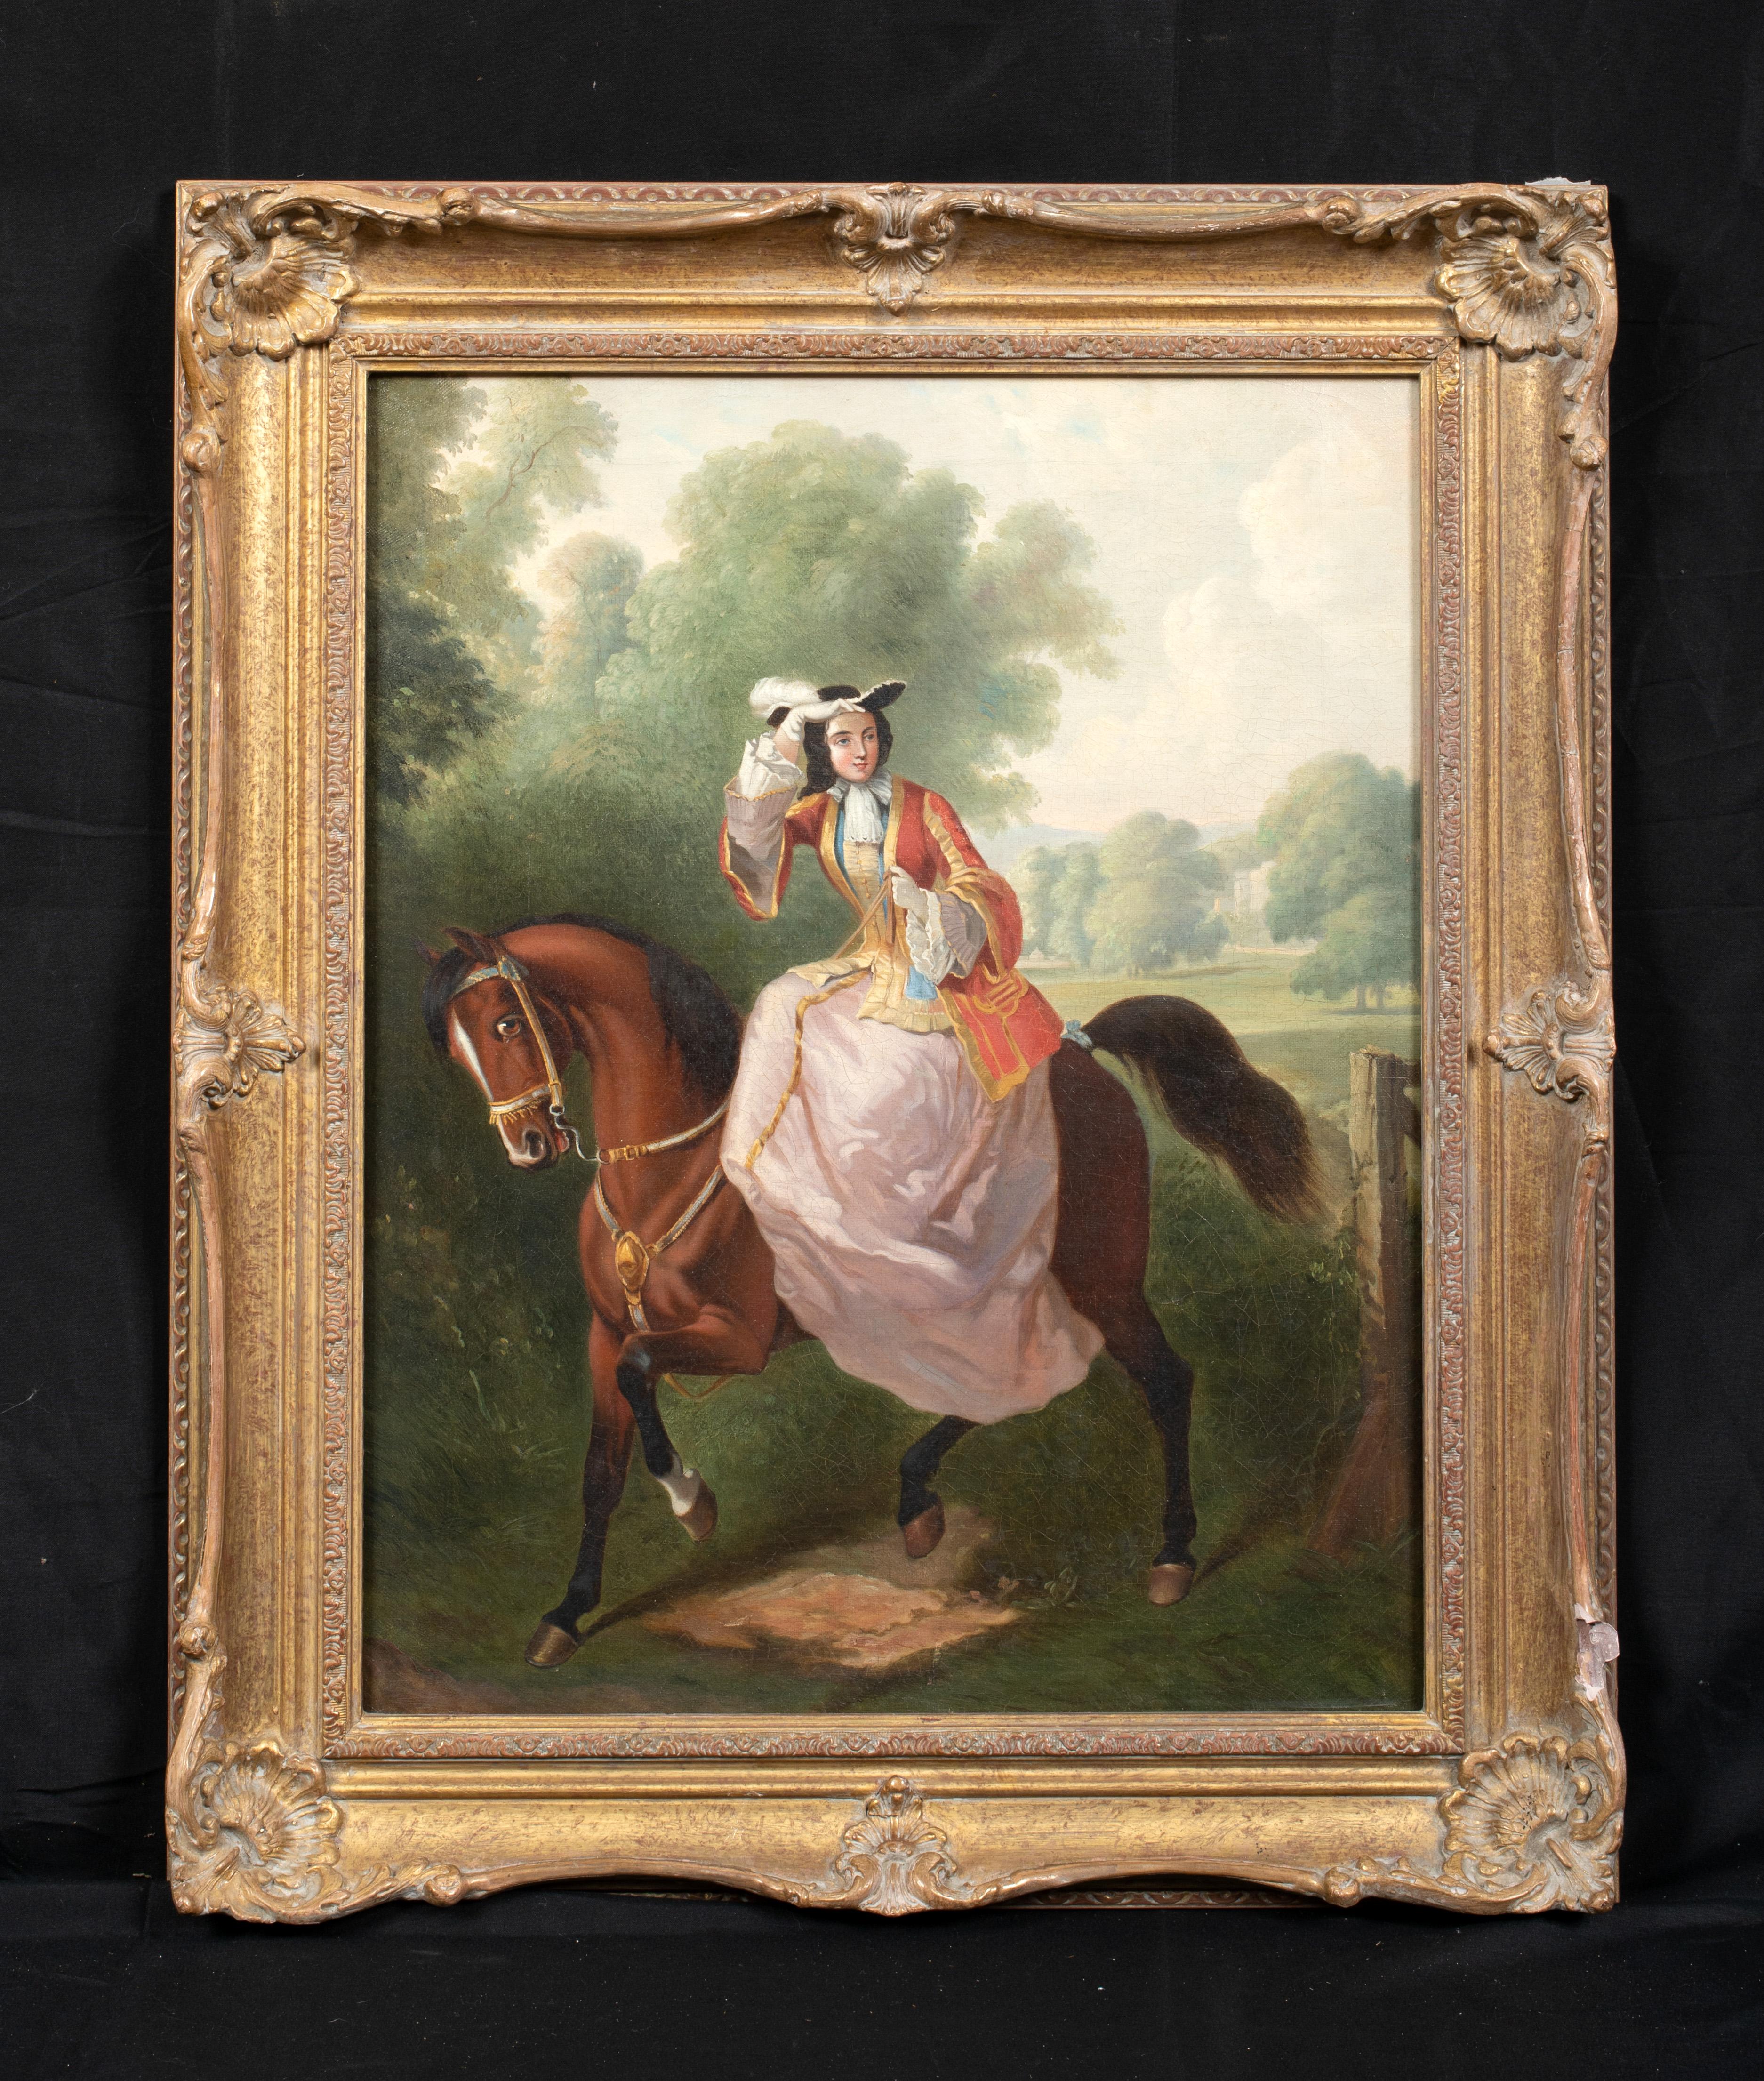 Portrait Of A Lady Riding Sidesaddle, 19th Century - Painting by Unknown